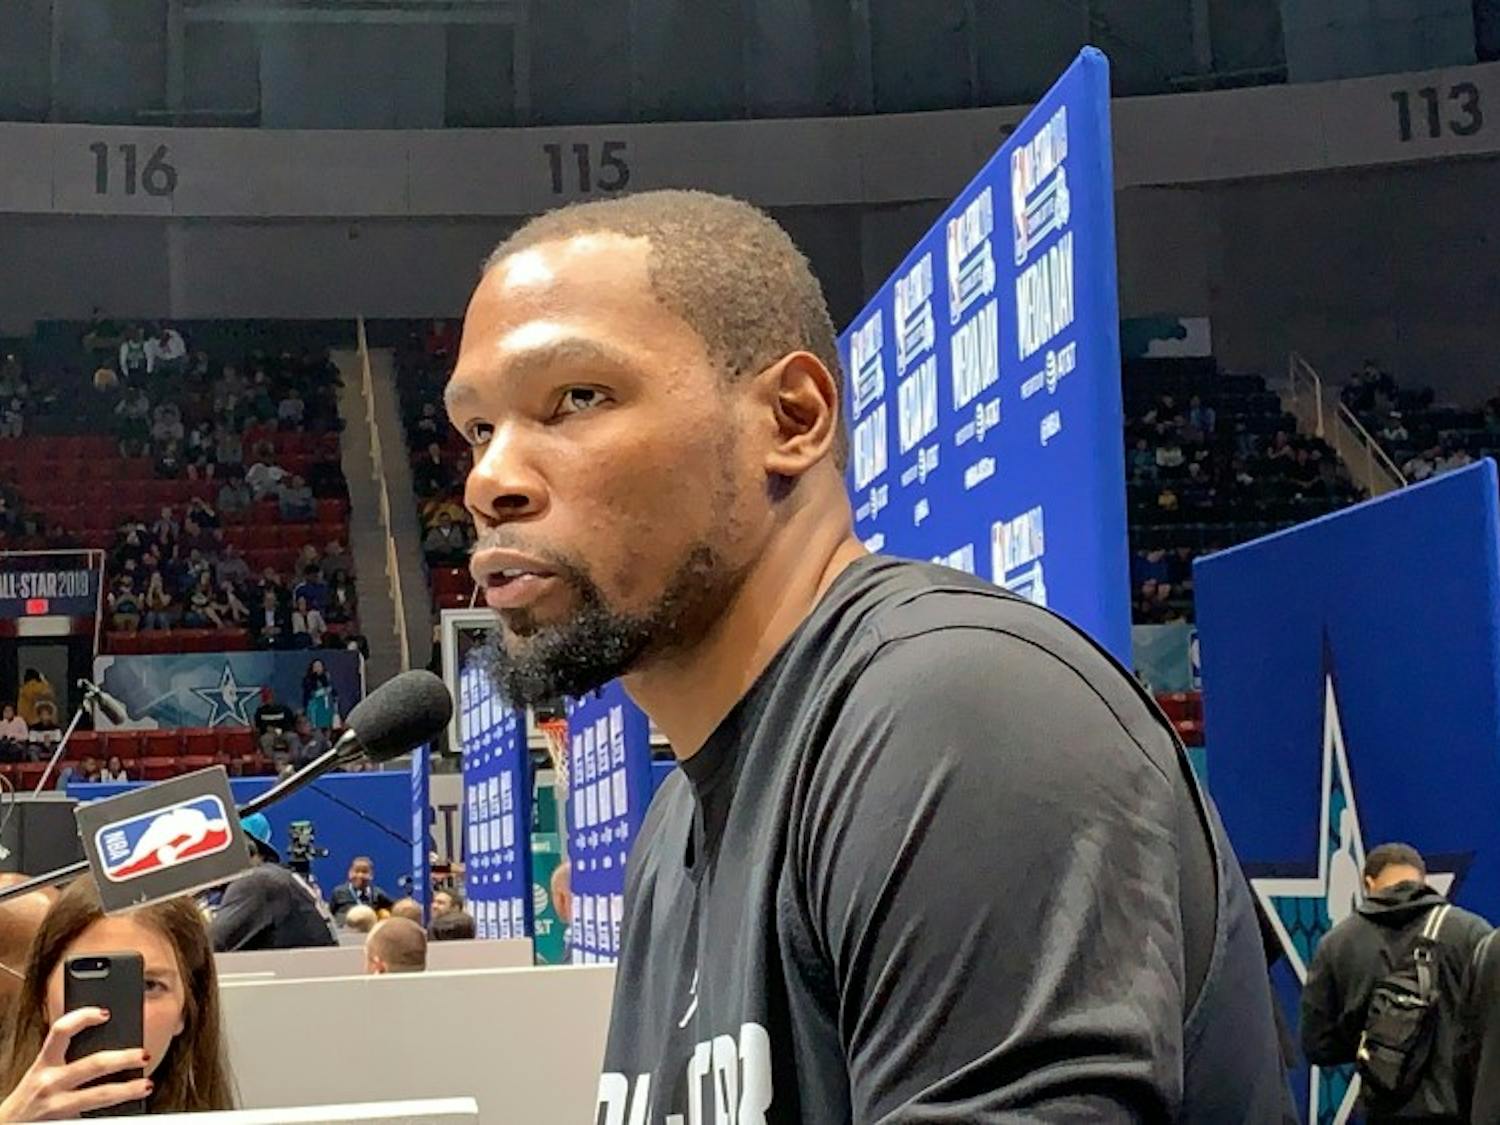 NBA All-Star and defending champ Kevin Durant will be at Cameron Indoor tonight for Duke's game vs. N.C. State.